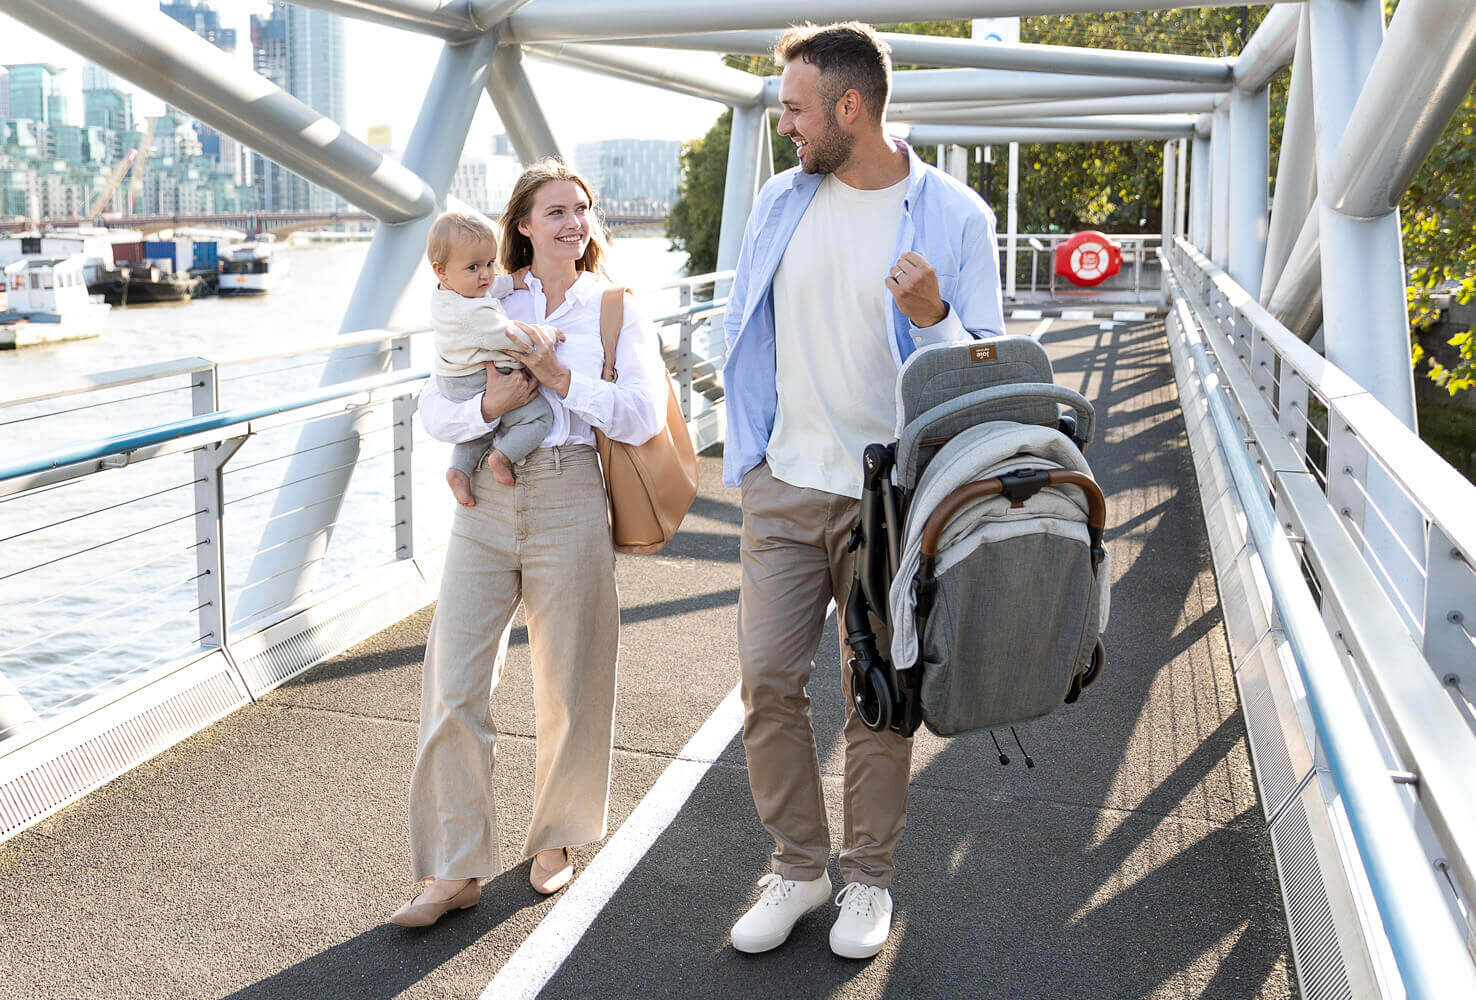   Joie tourist stroller folded being carried by dad while mom and baby walk by his side over a bridge.